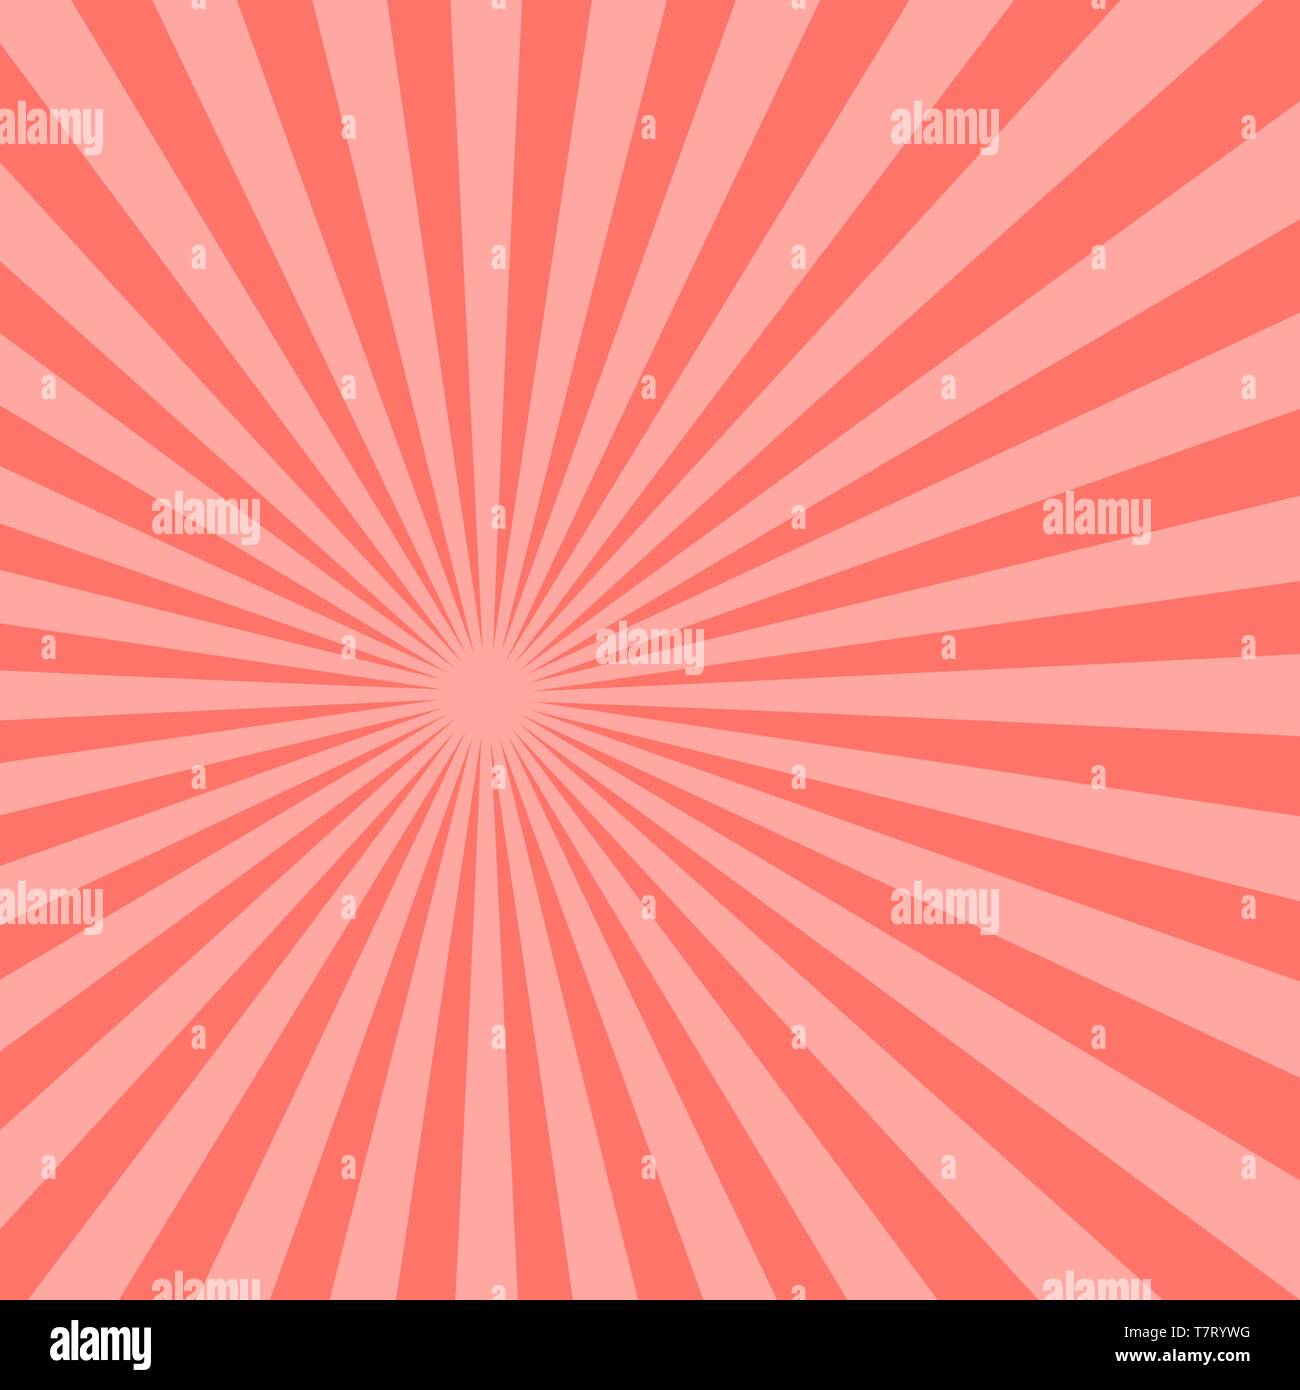 Abstract sunbeams background. Vector illustration. Trendy pink color background Stock Vector